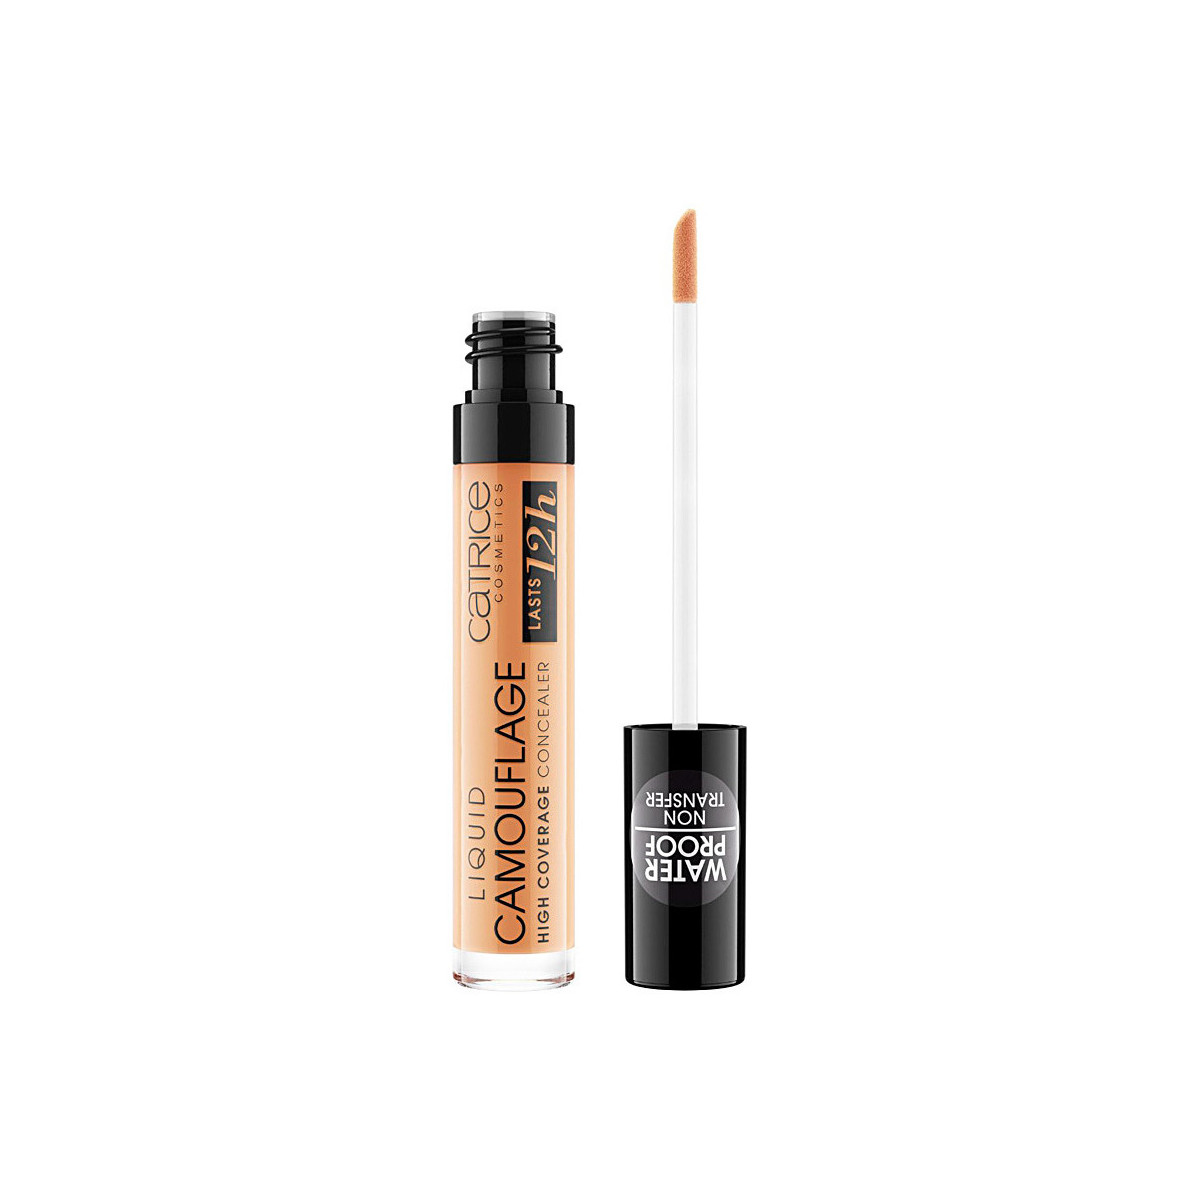 Beauty Damen Make-up & Foundation  Catrice Liquid Camouflage High Coverage Concealer 060-latte Mac 